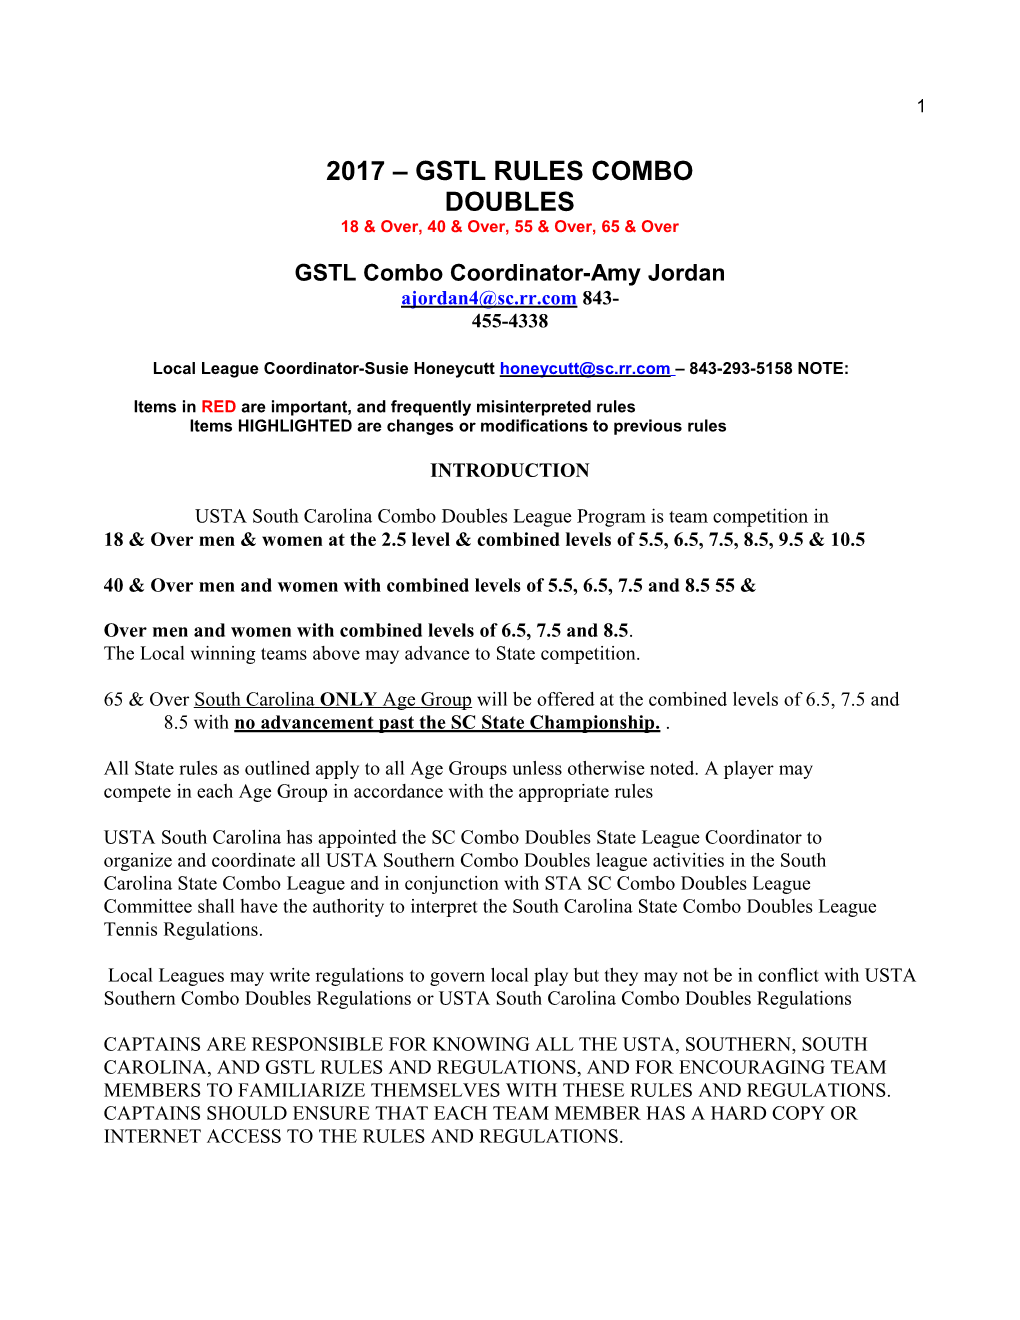 2017 Gstl Rules Combo Doubles